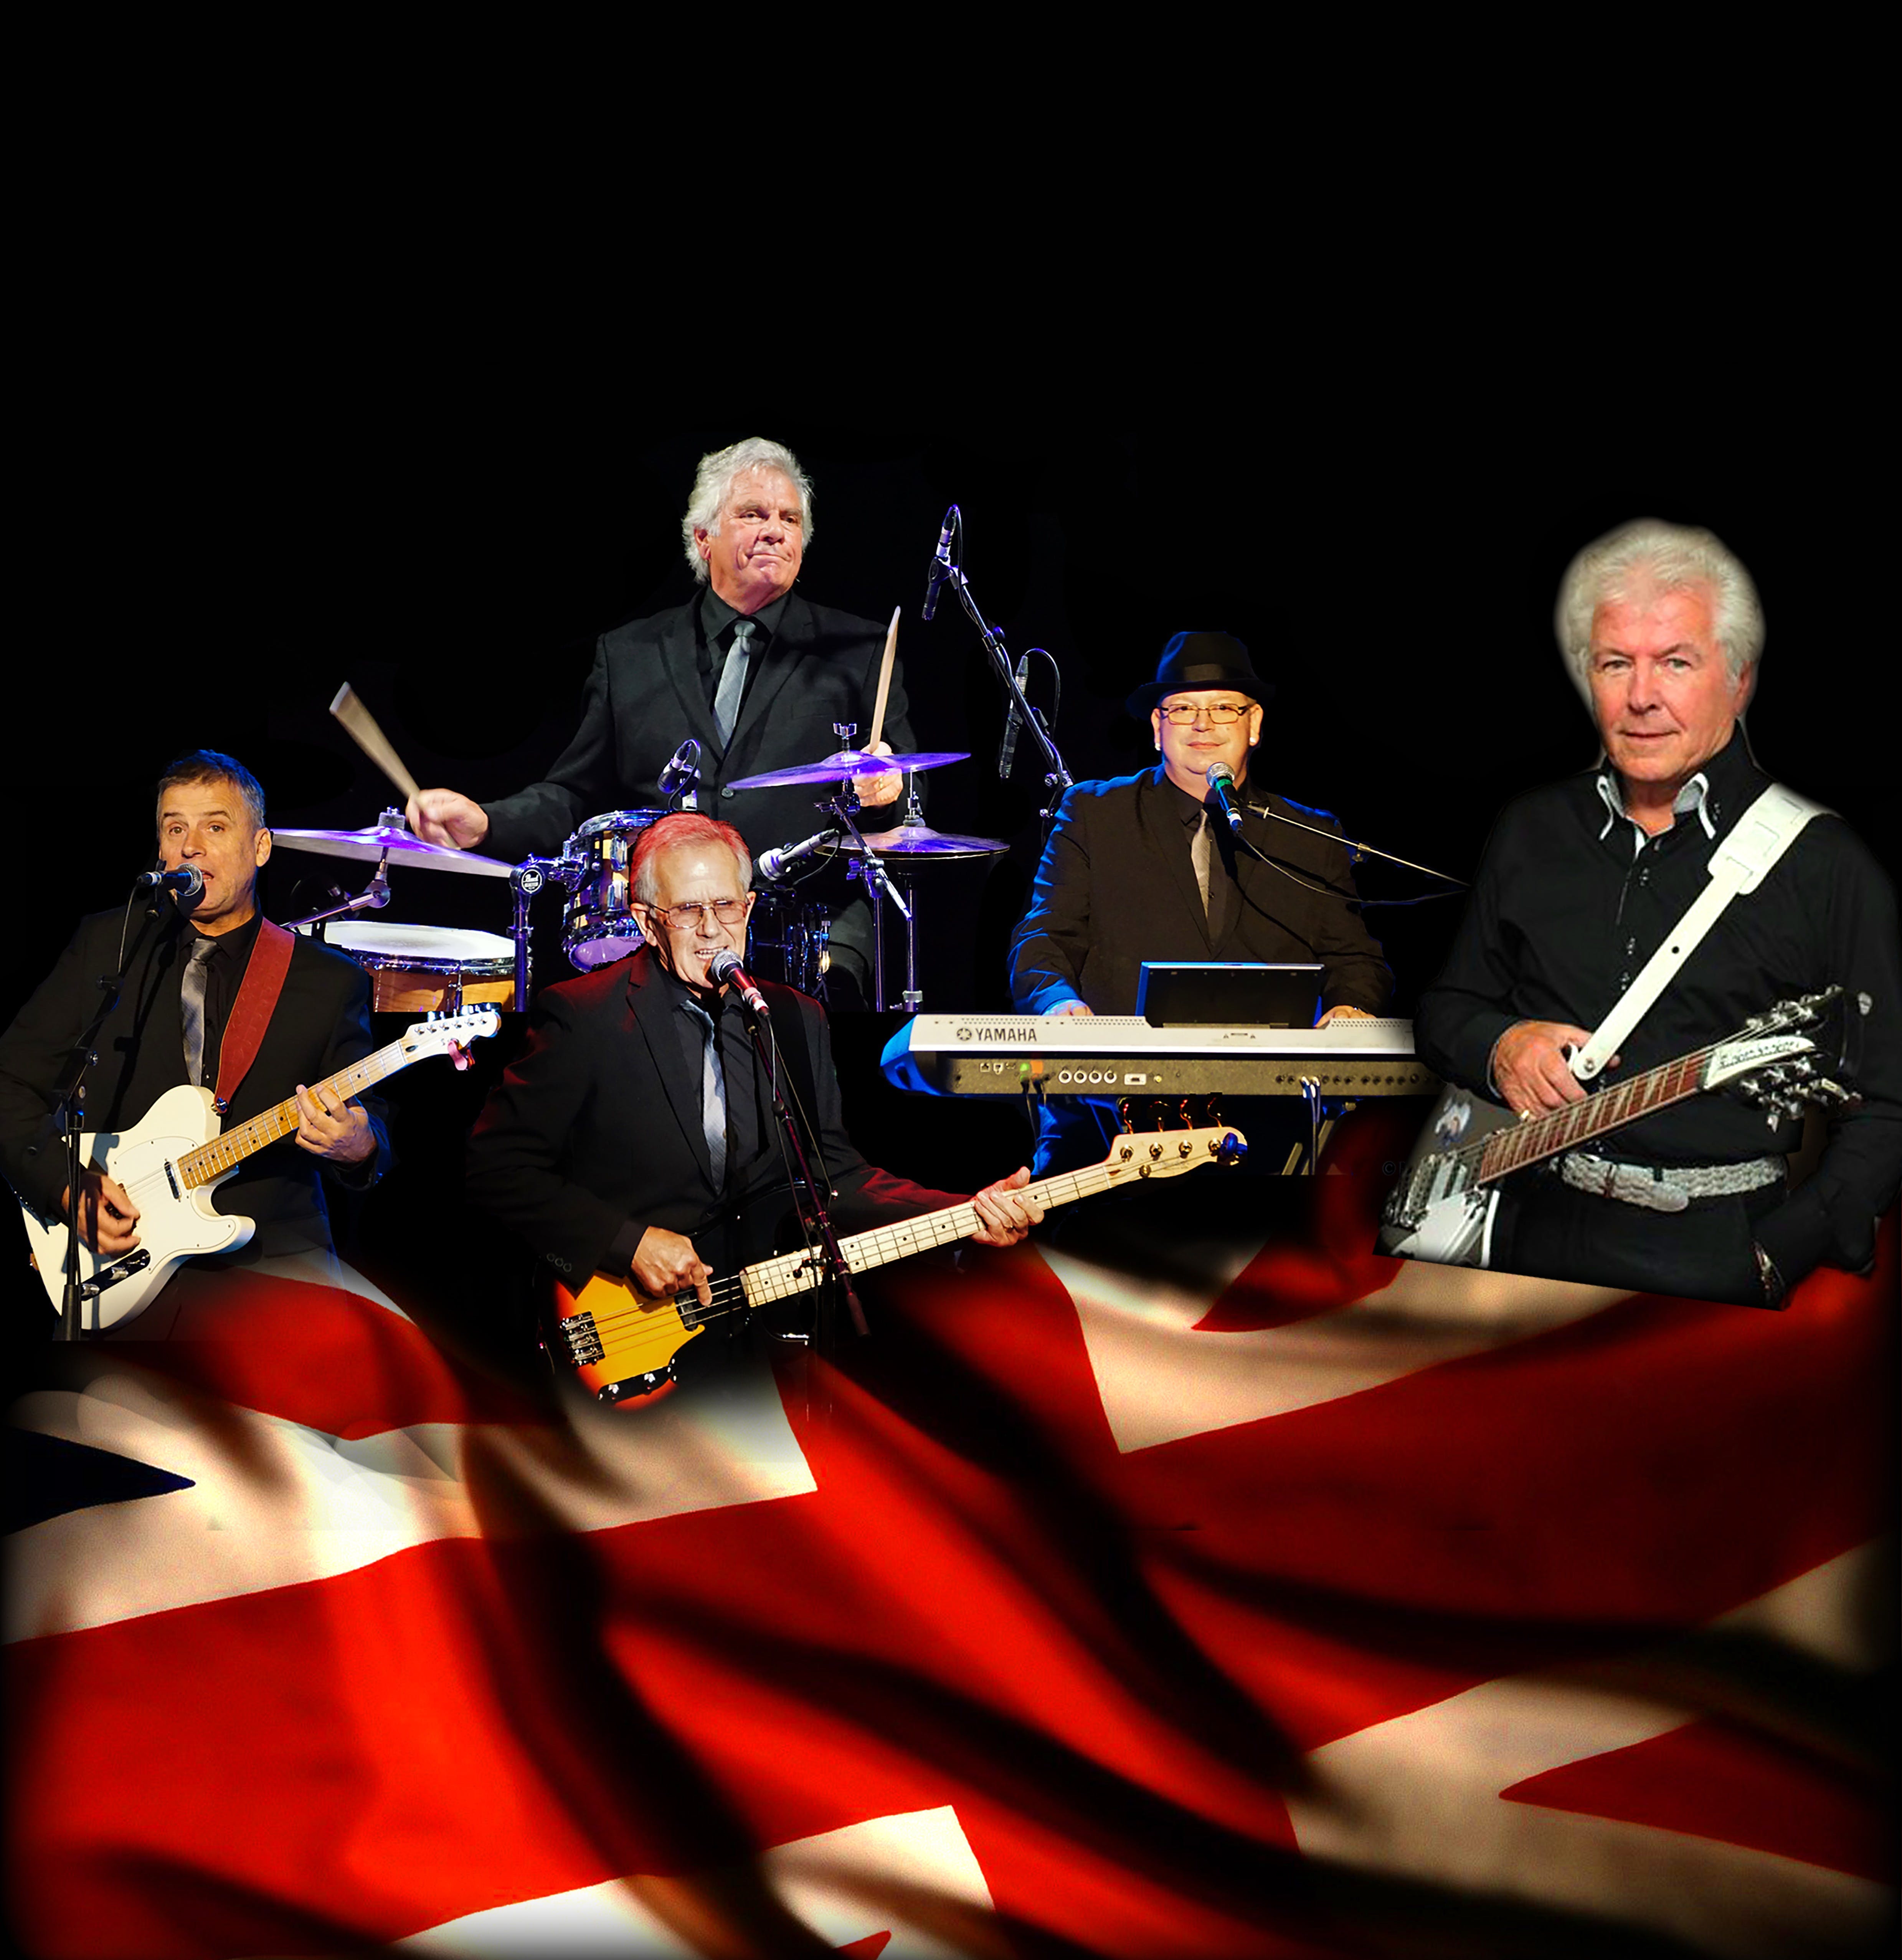 Herman's Hermits with Special Guest Mike Pender - The Six O'Clock Hop - Pubs Sydney